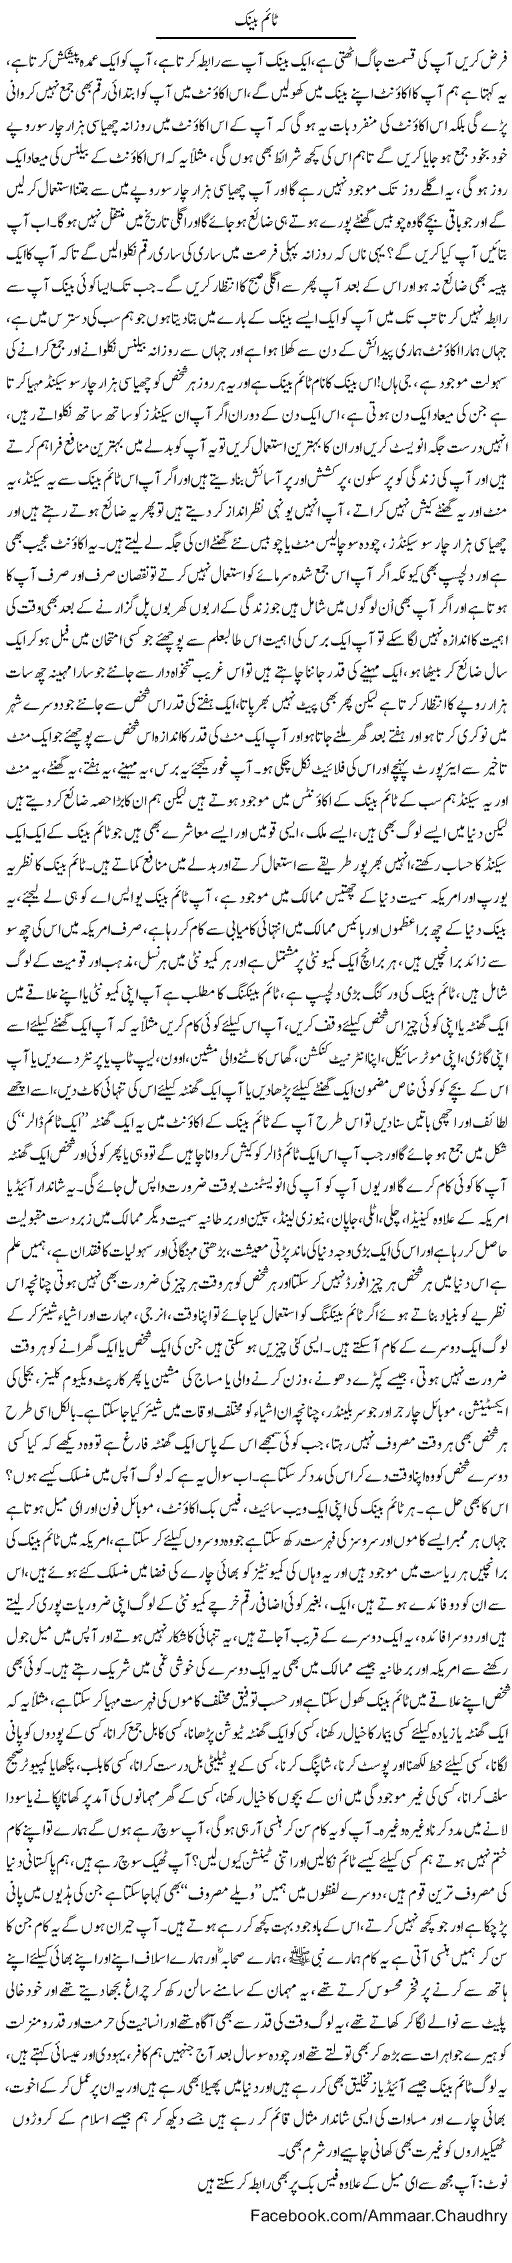 Time Bank Express Column Amad Chaudhry 12 June 2011